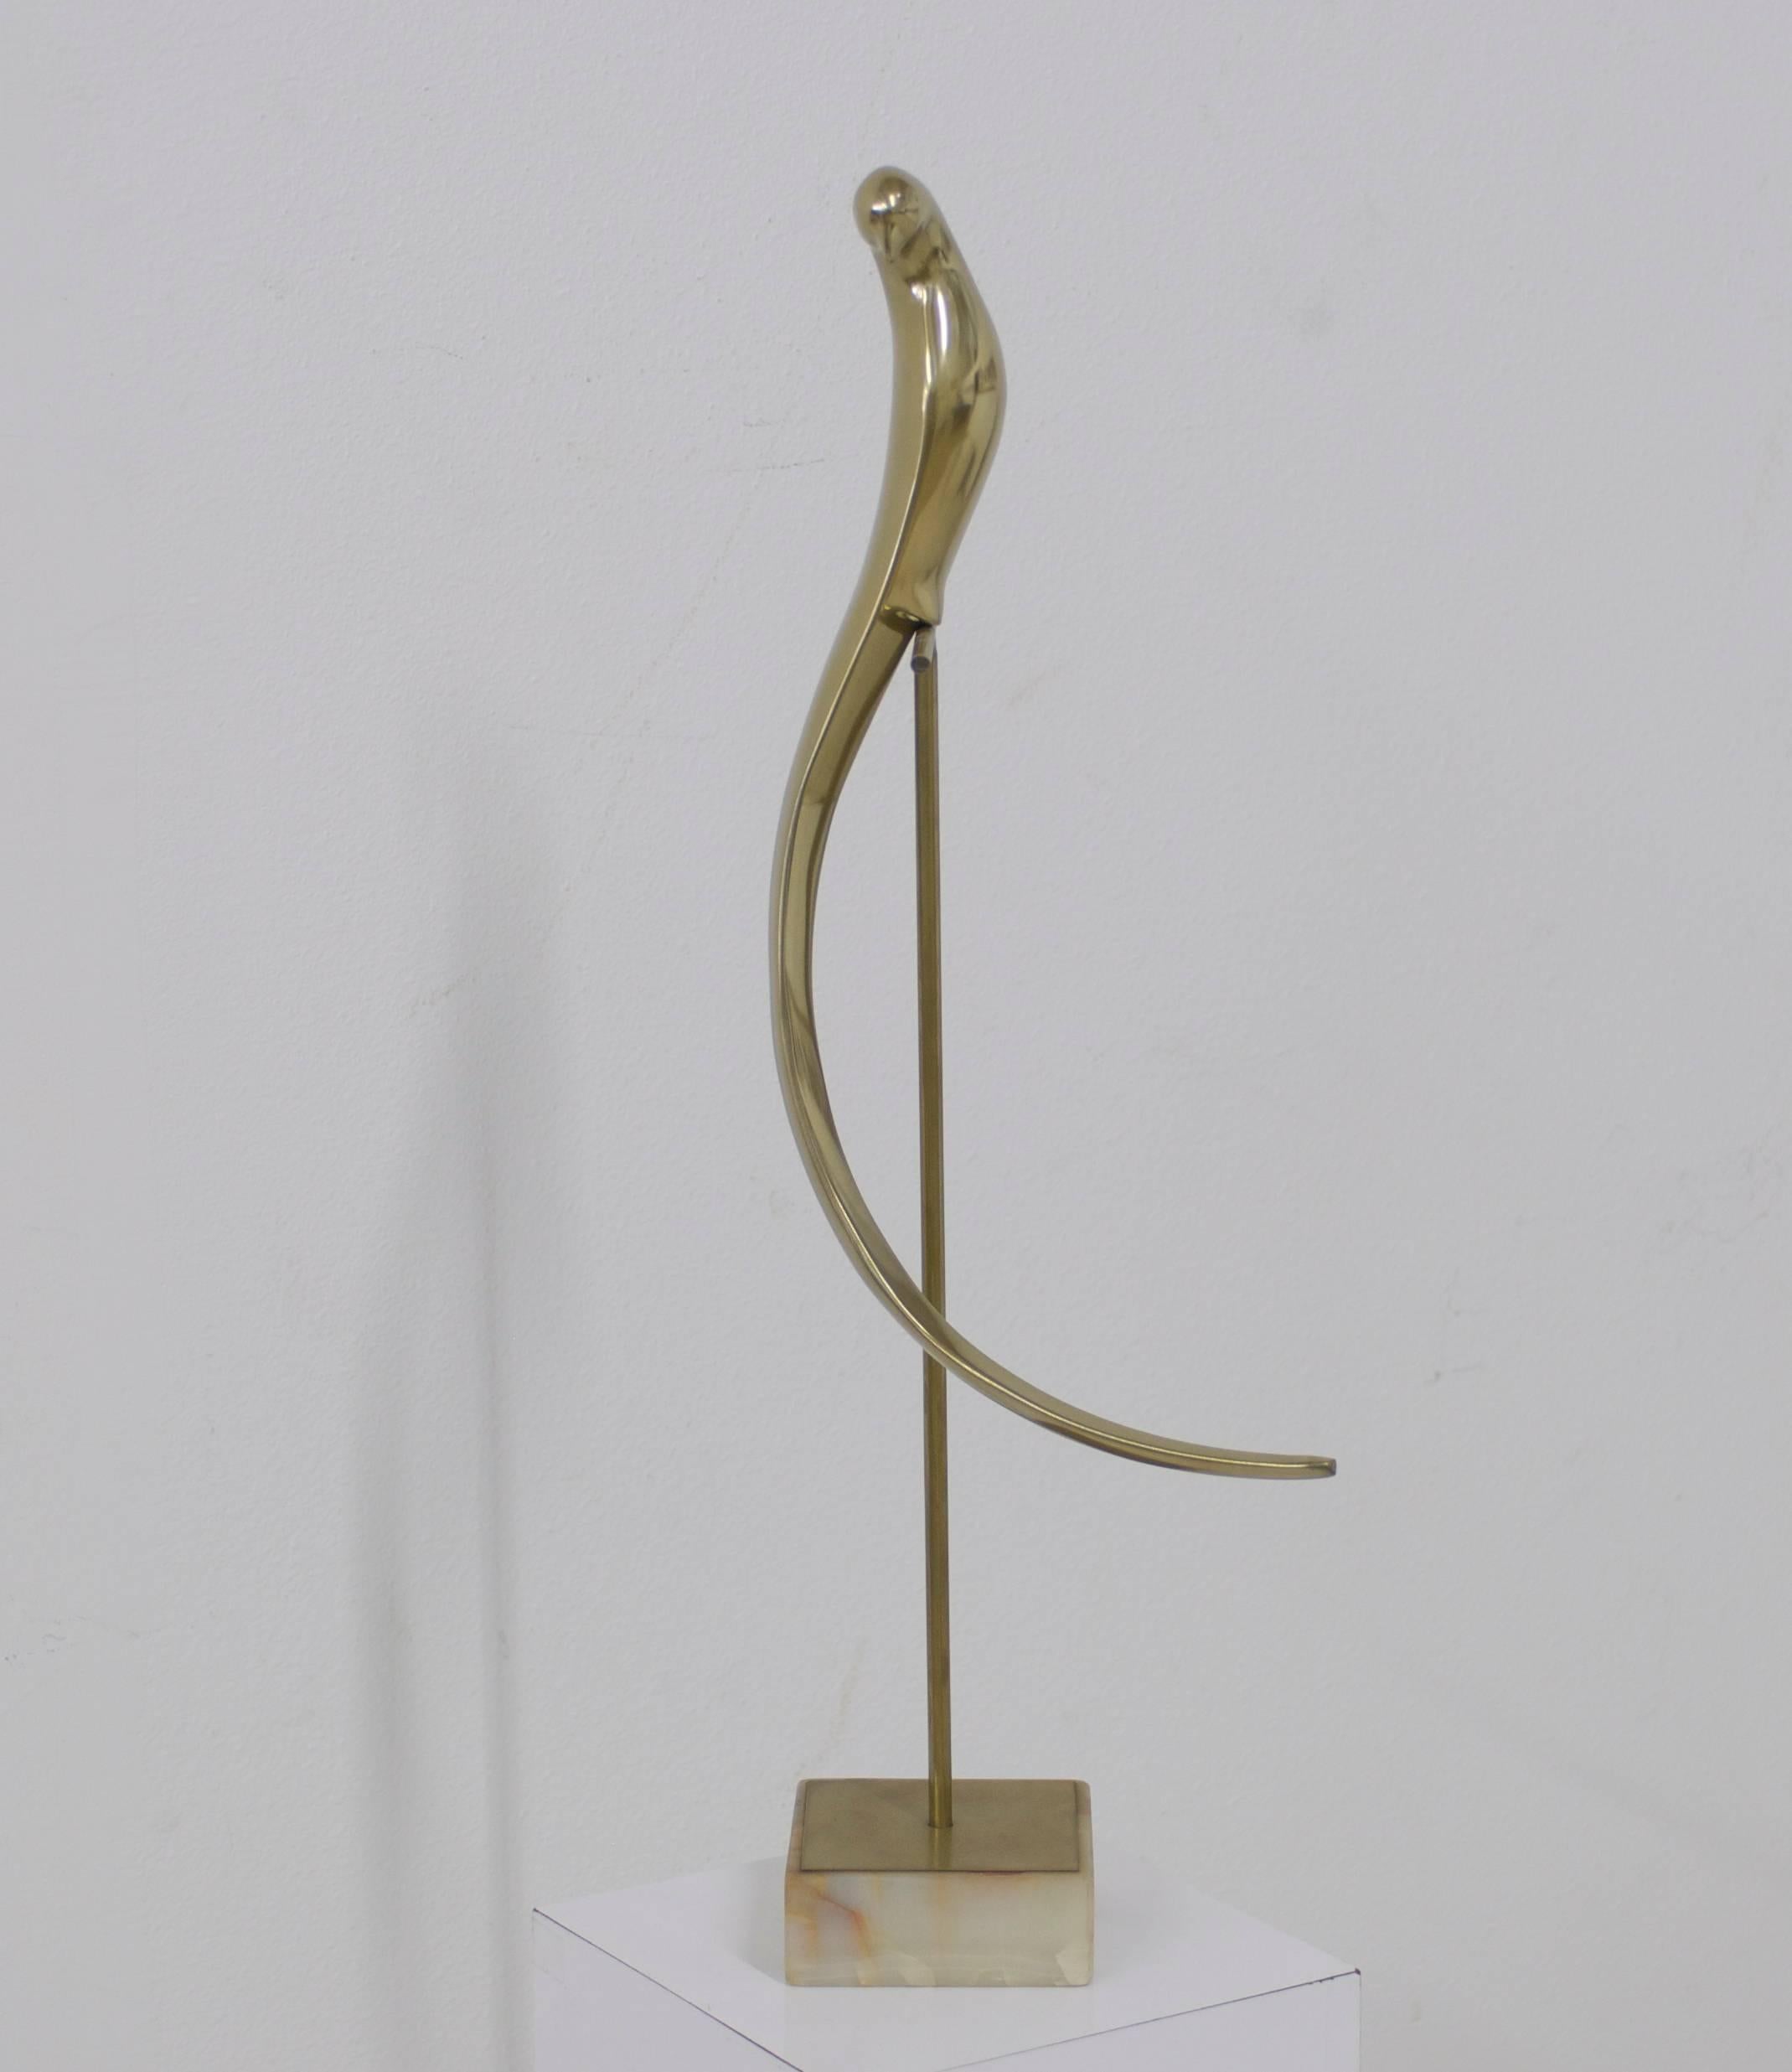 Beautiful brass bird sculpture mounted on an onyx marble stand. We had it professionally polished.
The base measures 5